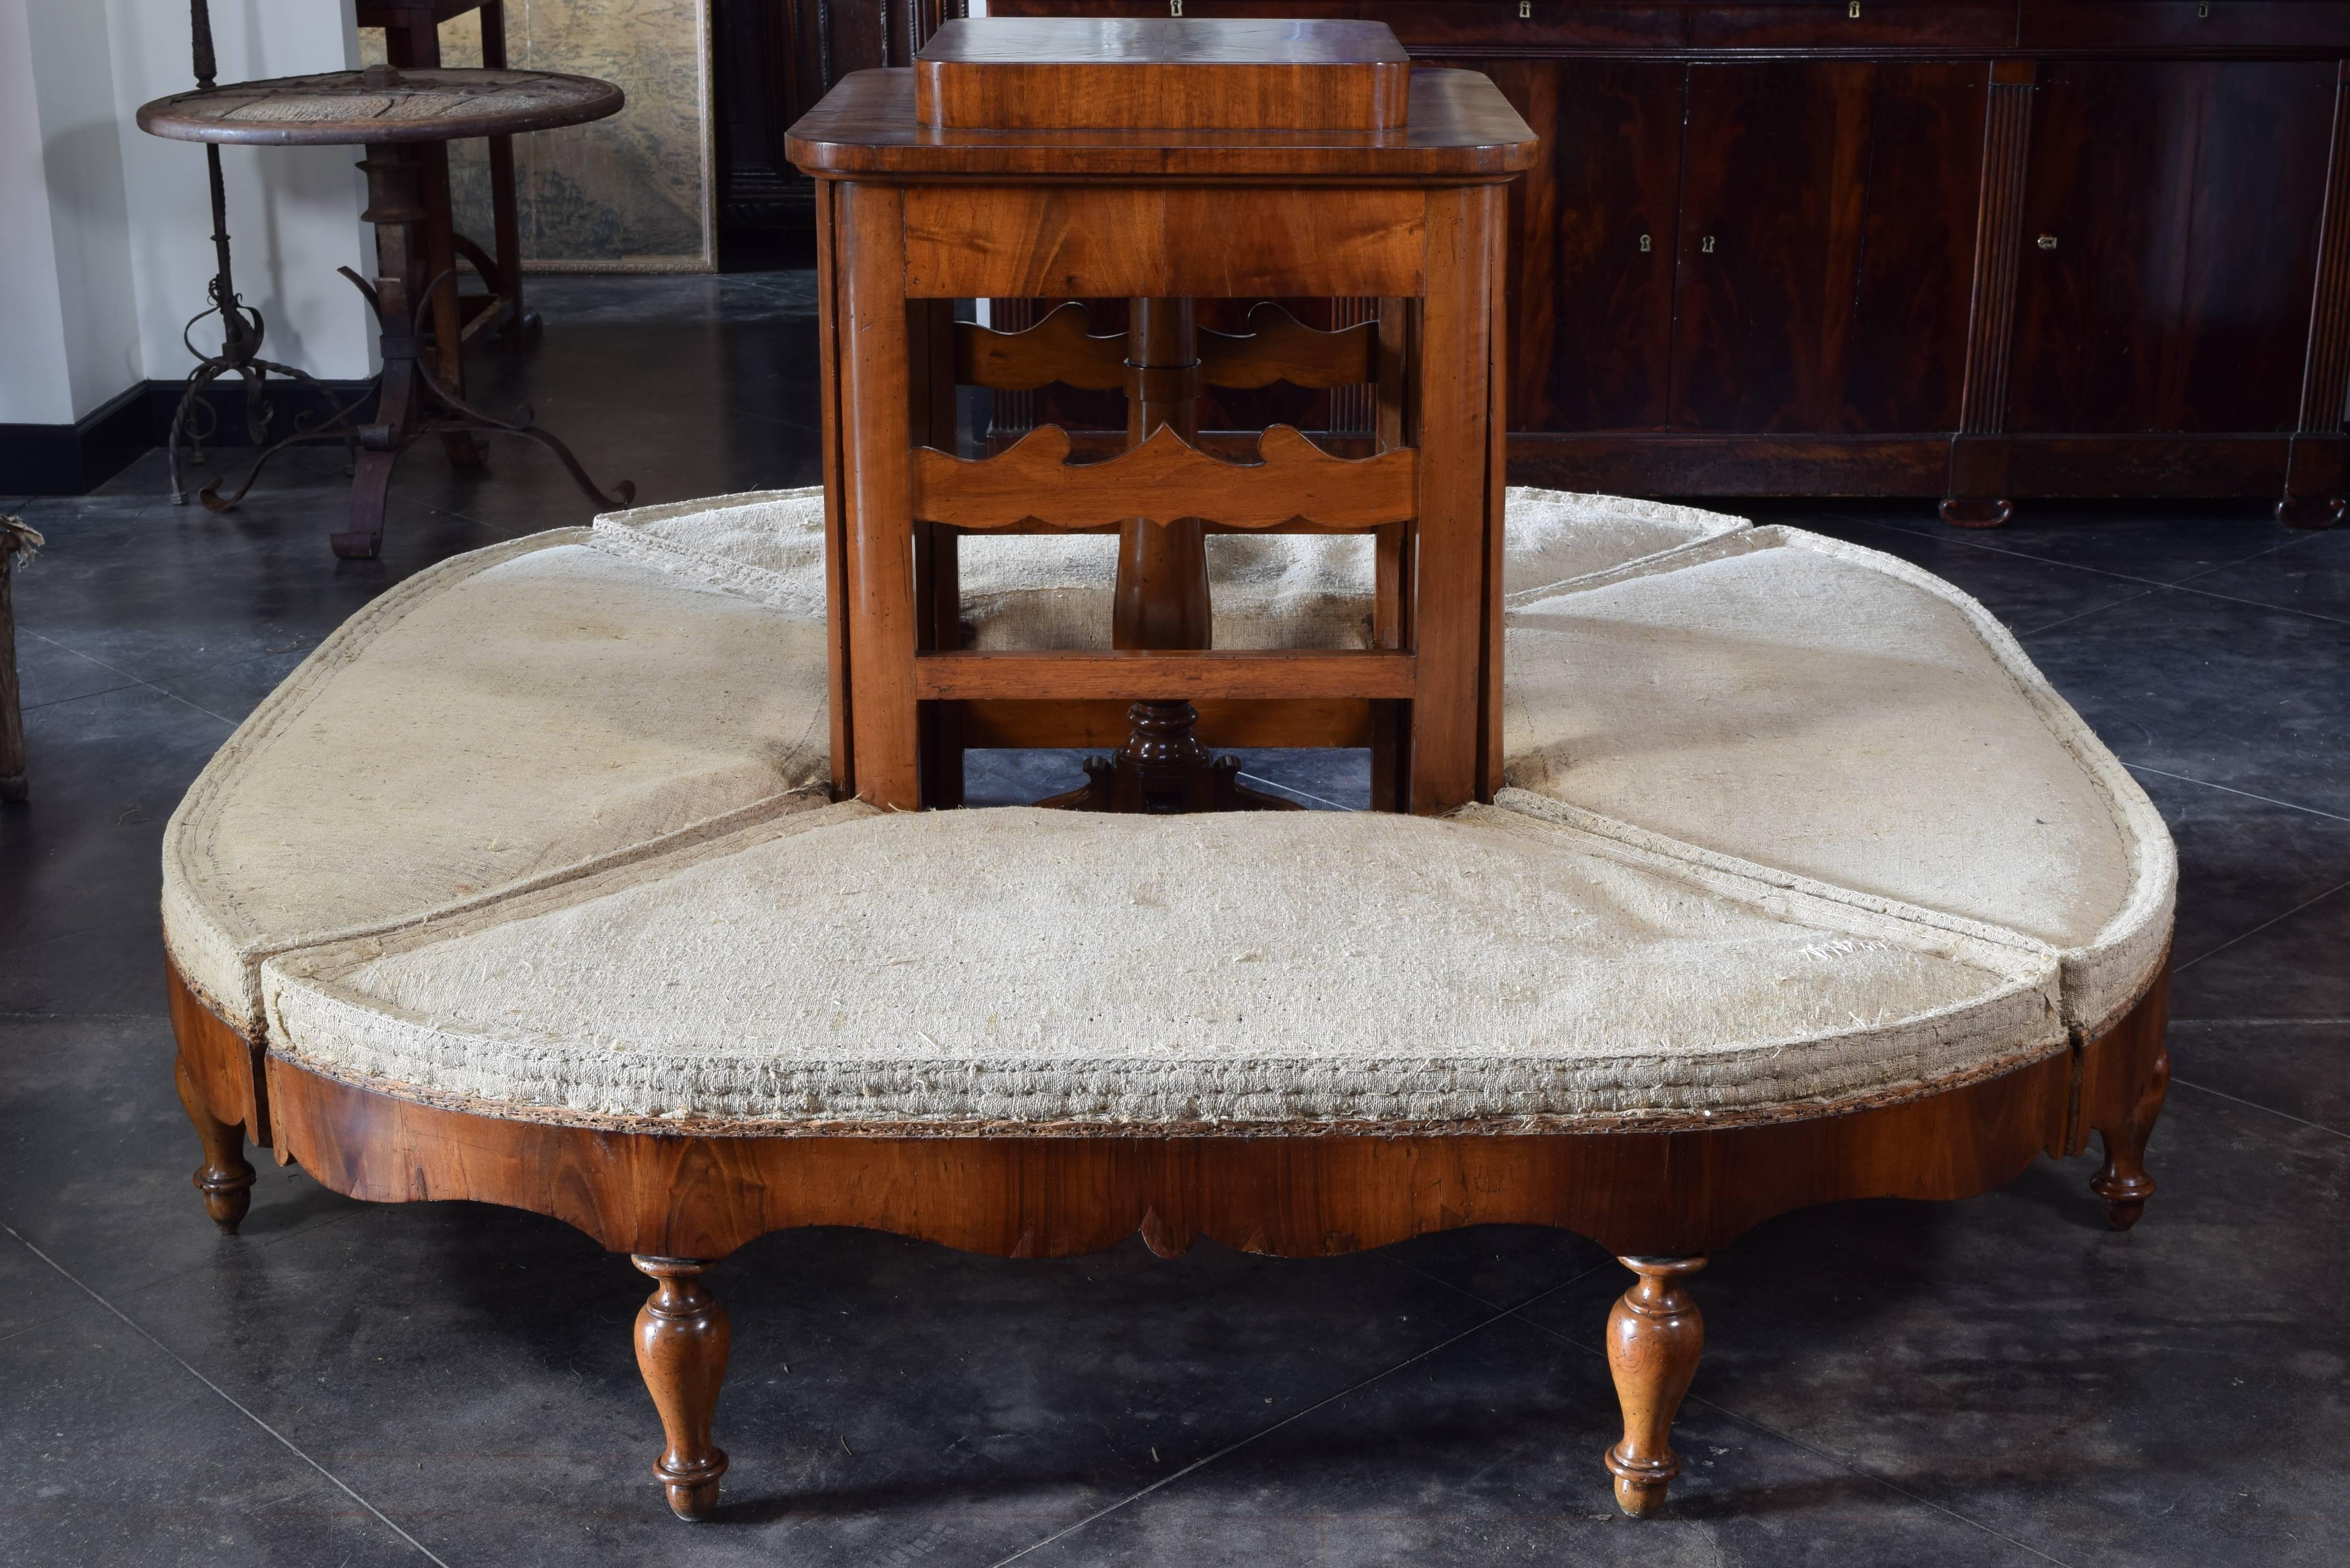 Wonderully constructed with a central four-leg table and a top enclosing the four seating sections, four-section Borne each section with a shaped ladder back, upholstered seat and raised on turned front legs, the sections hooking together securely,